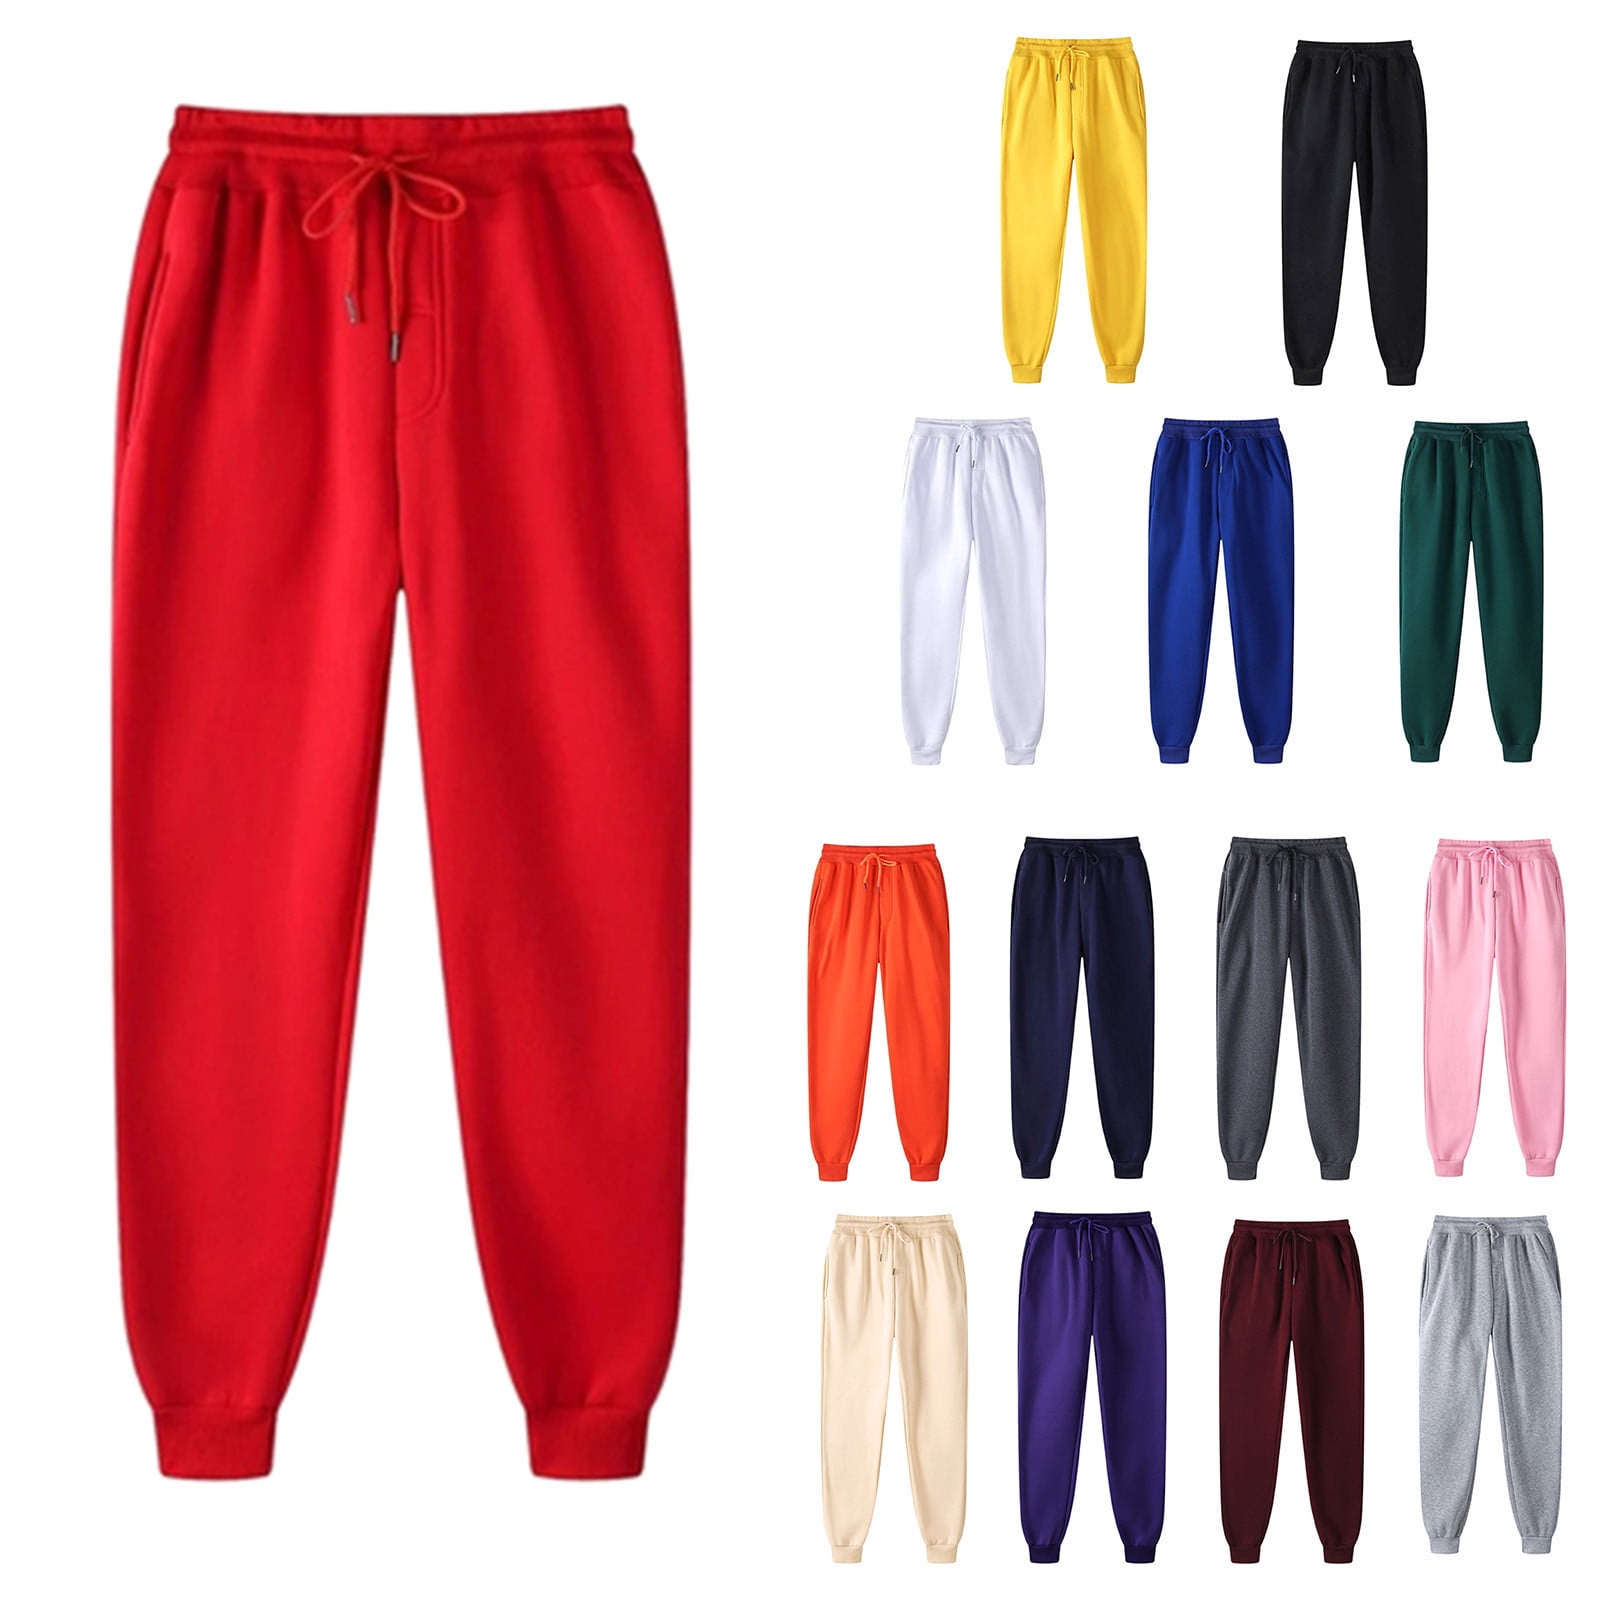 Plus Size Sweatpants for Women with Pockets Elastic Waist with ...